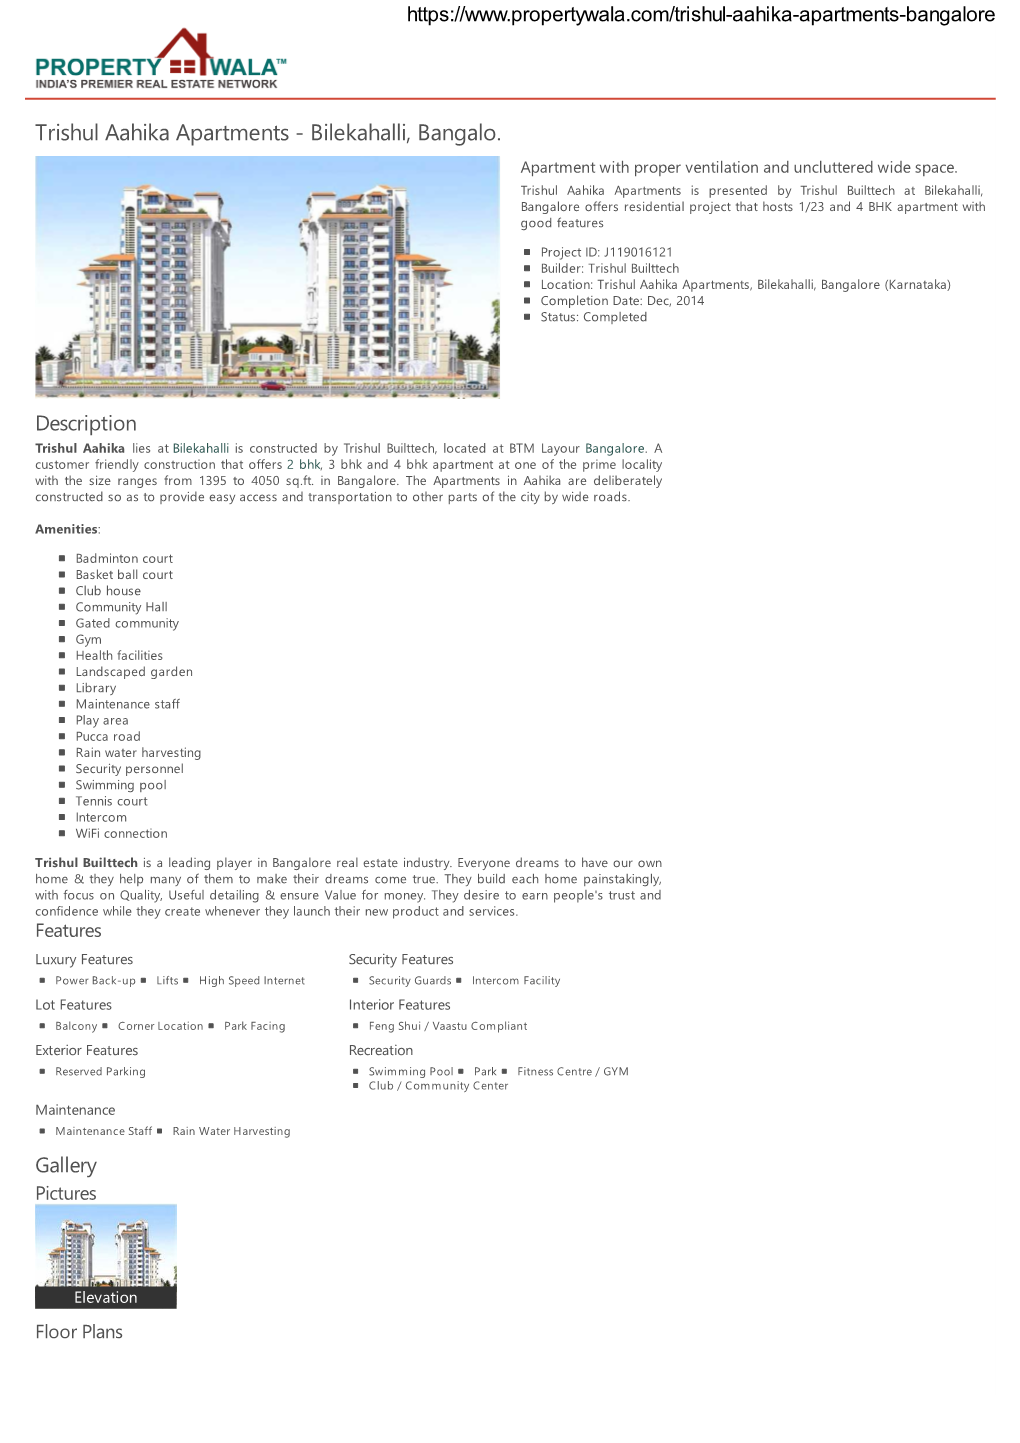 Trishul Aahika Apartments - Bilekahalli, Bangalo… Apartment with Proper Ventilation and Uncluttered Wide Space